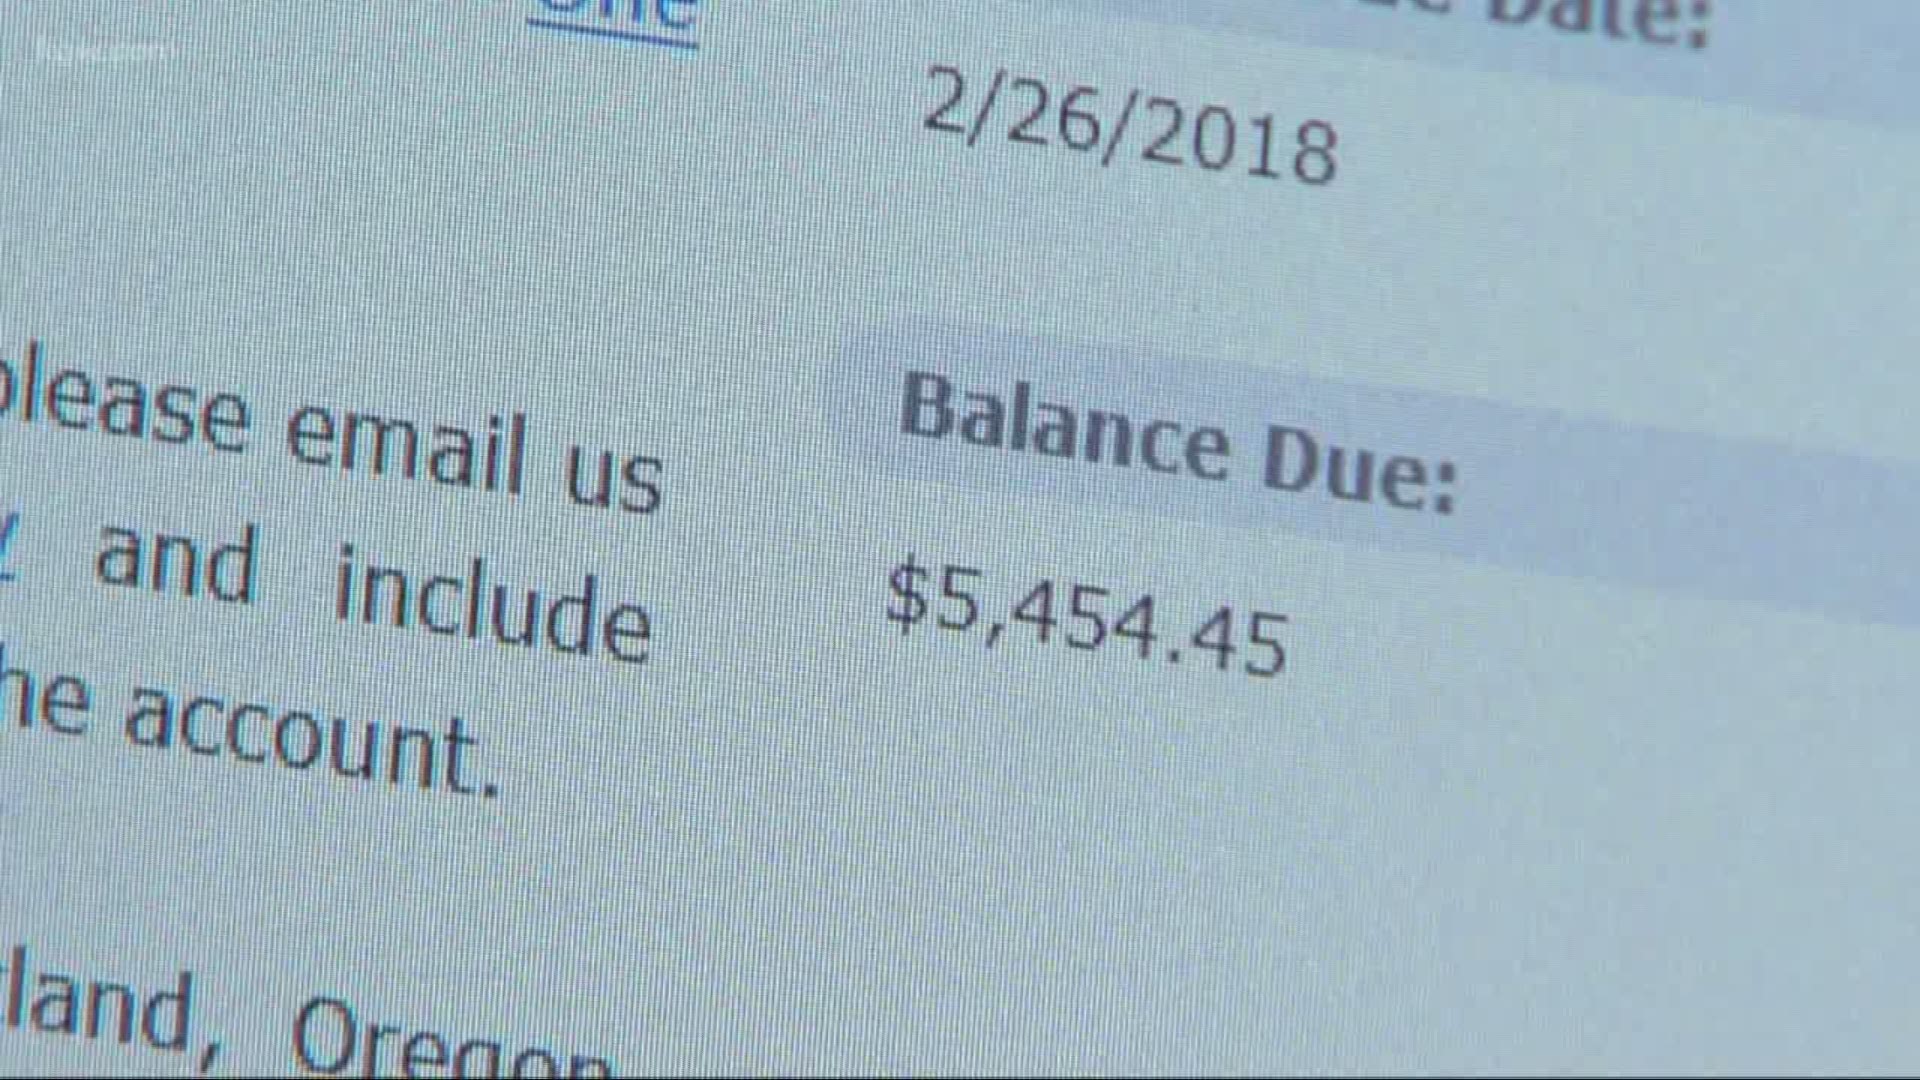 Portland couple shocked after receiving an outrages water bill.